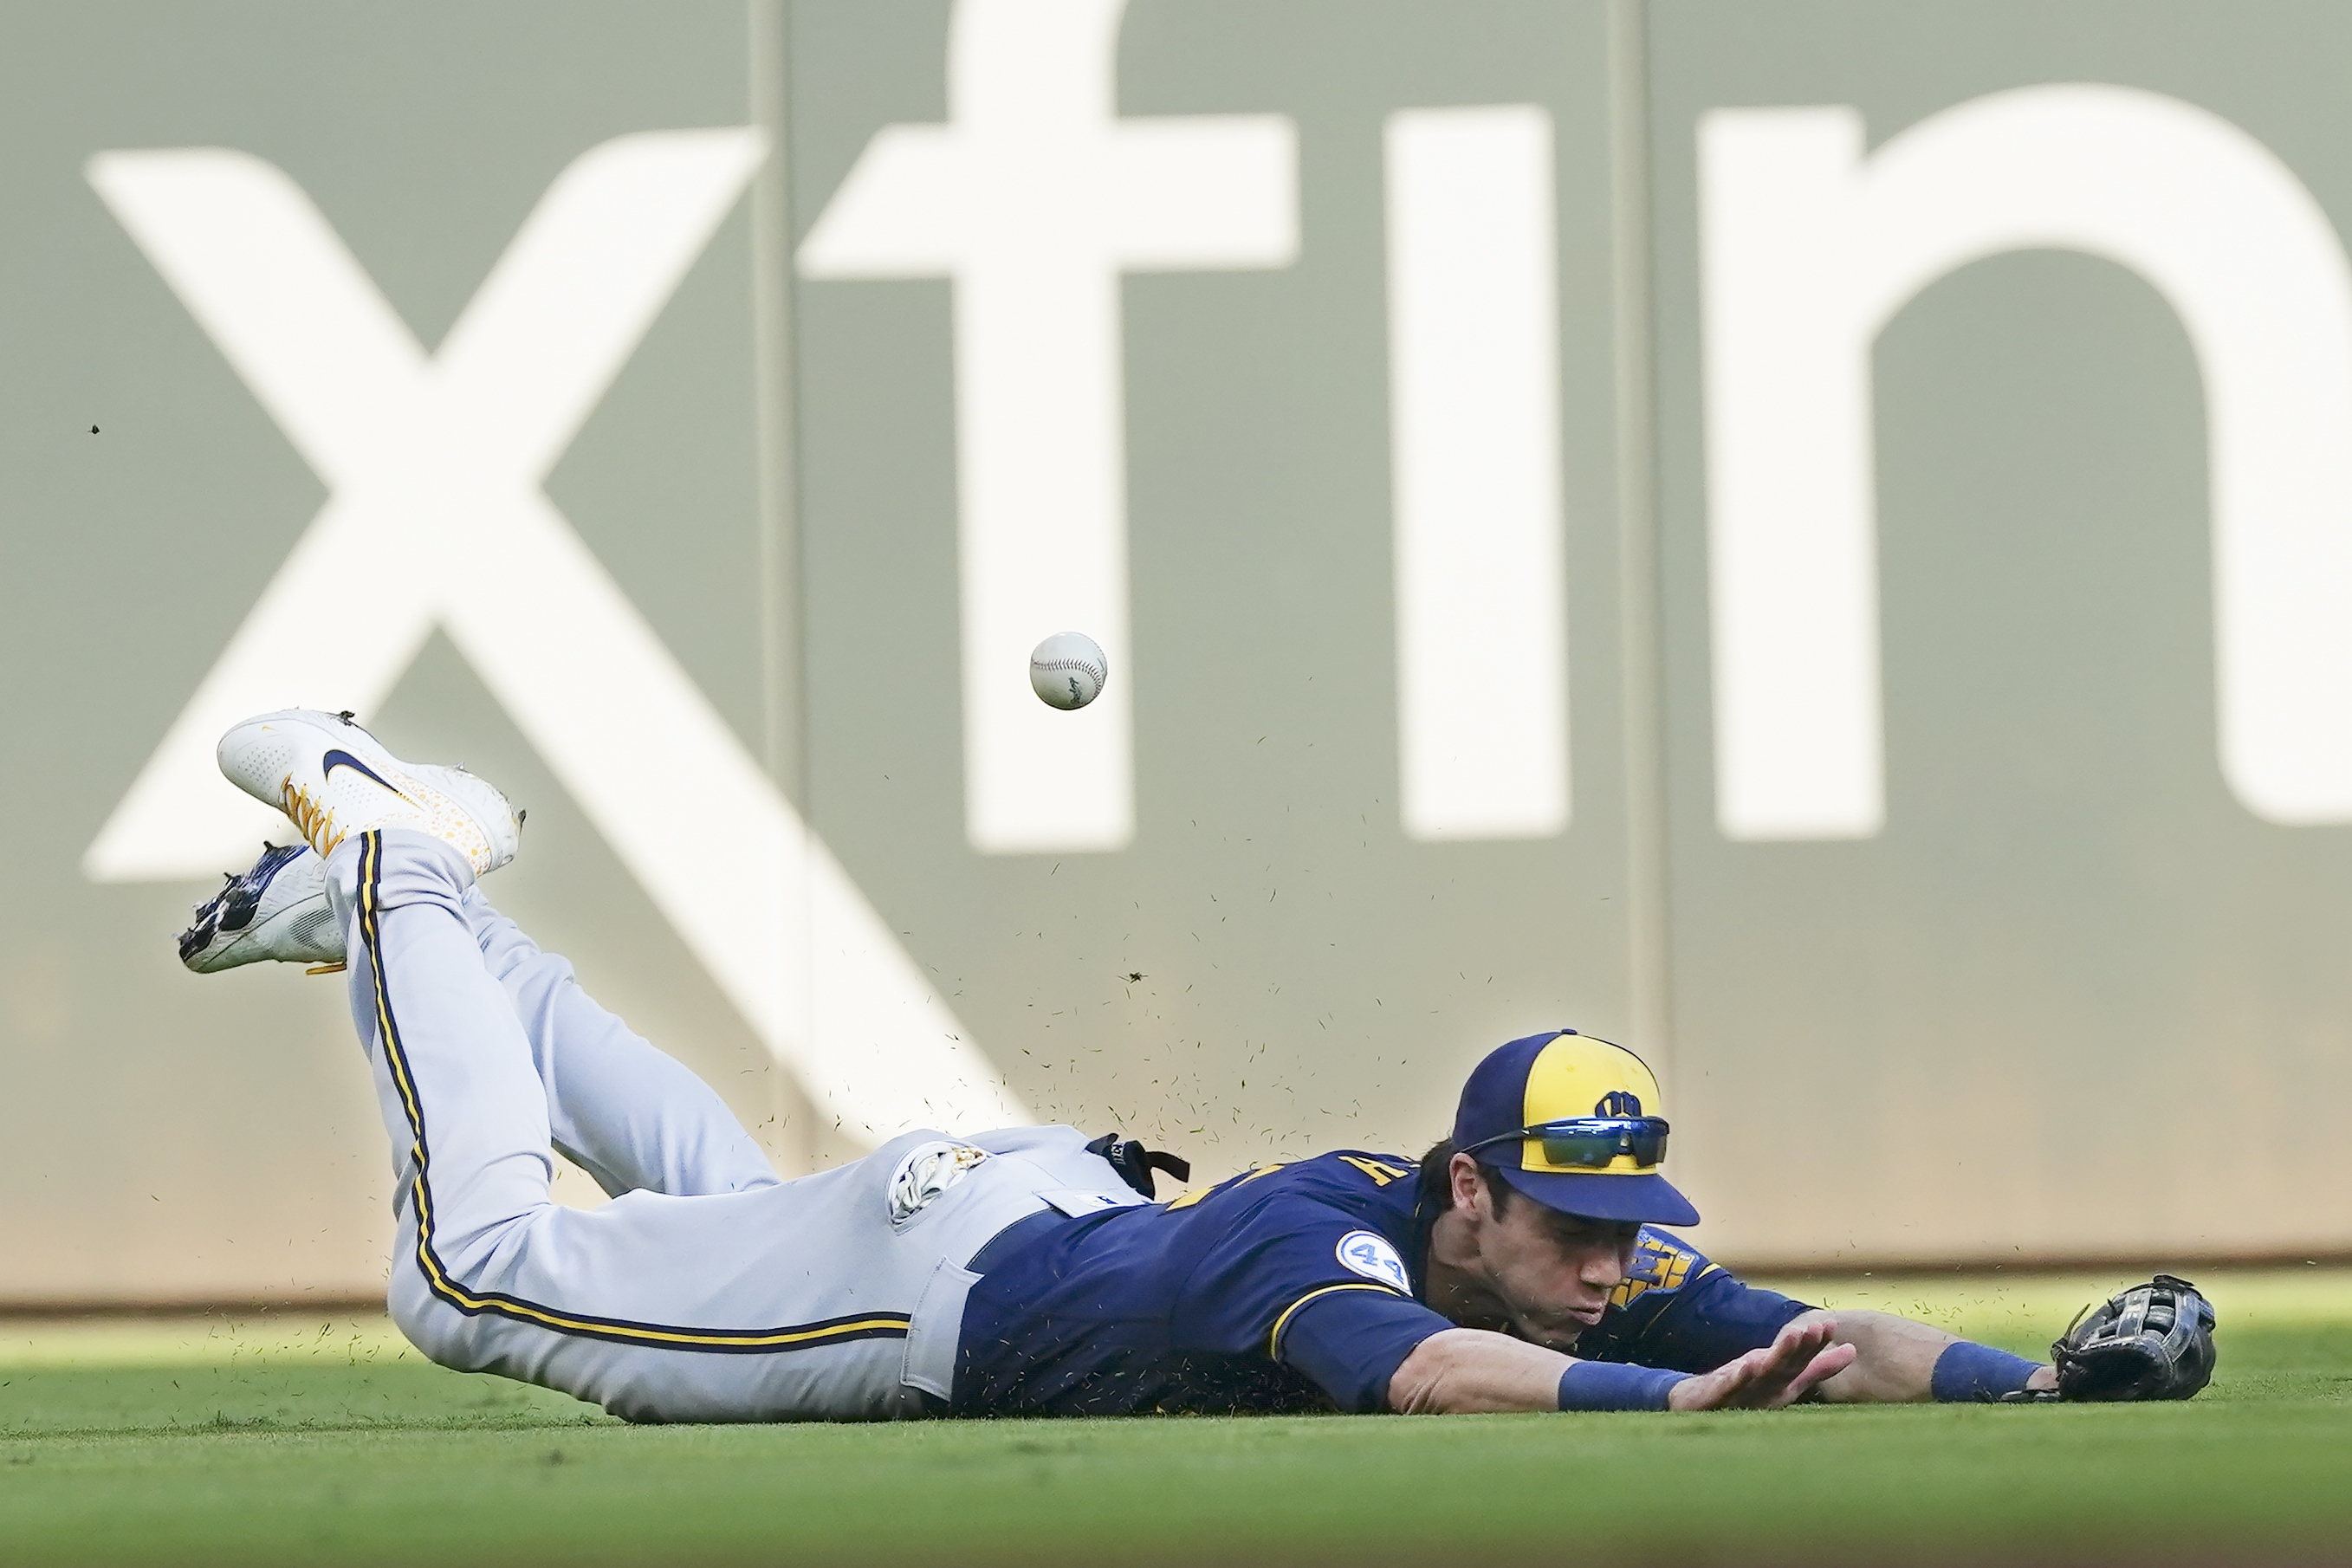 Jorge Soler tests positive for COVID-19, out of lineup for Brewers